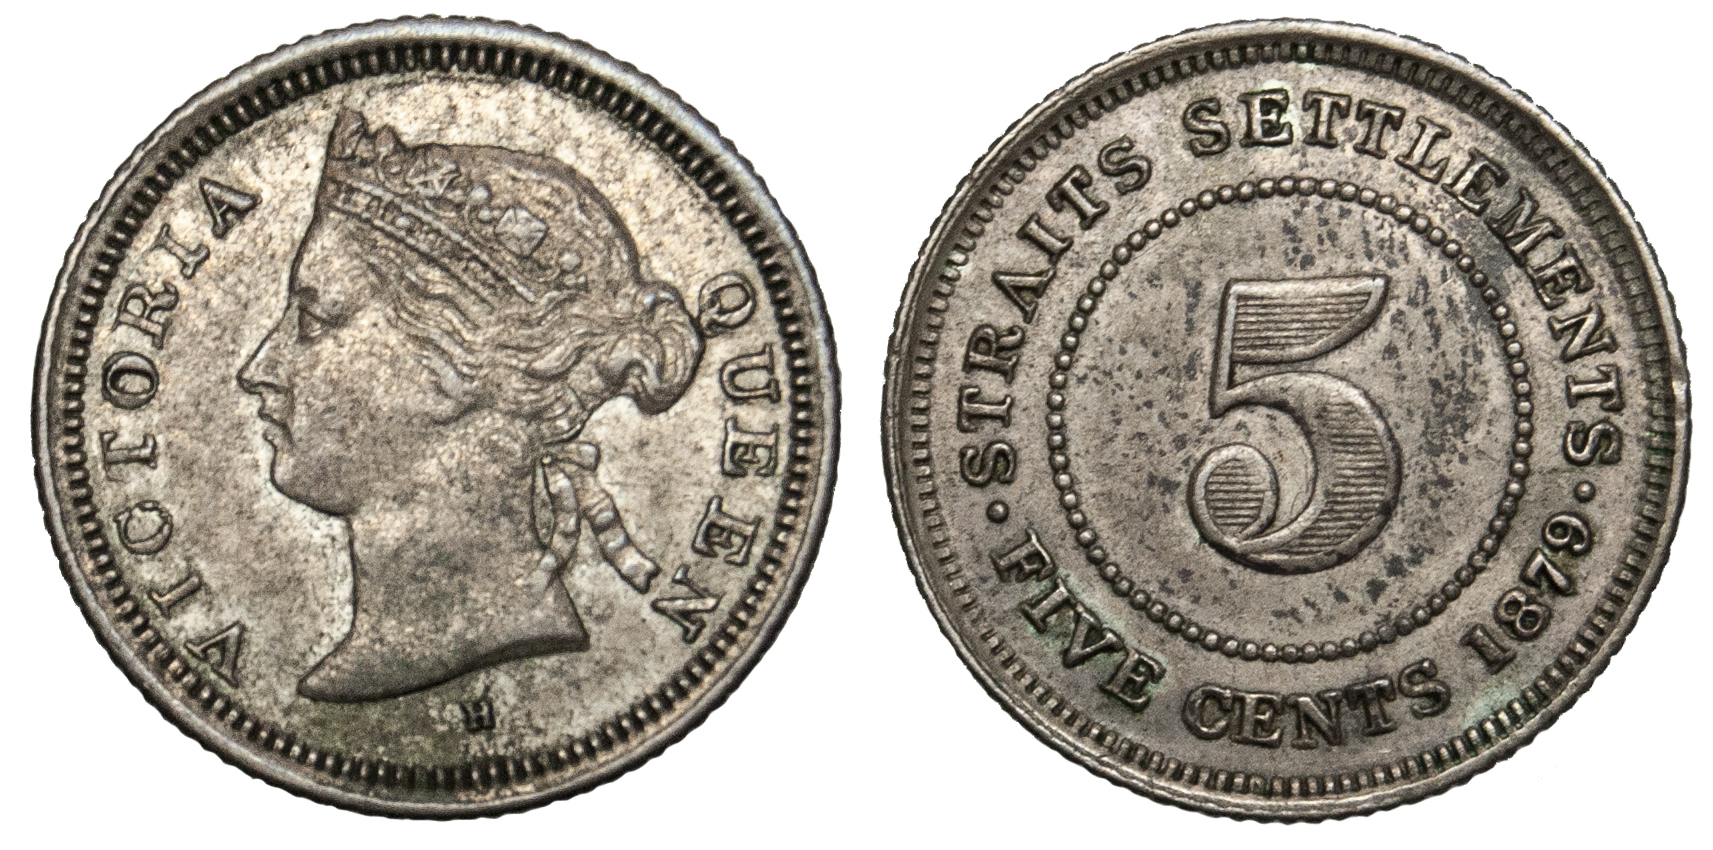 Straits Settlements, Victoria (1837‑1901), silver 5 Cents - finest known